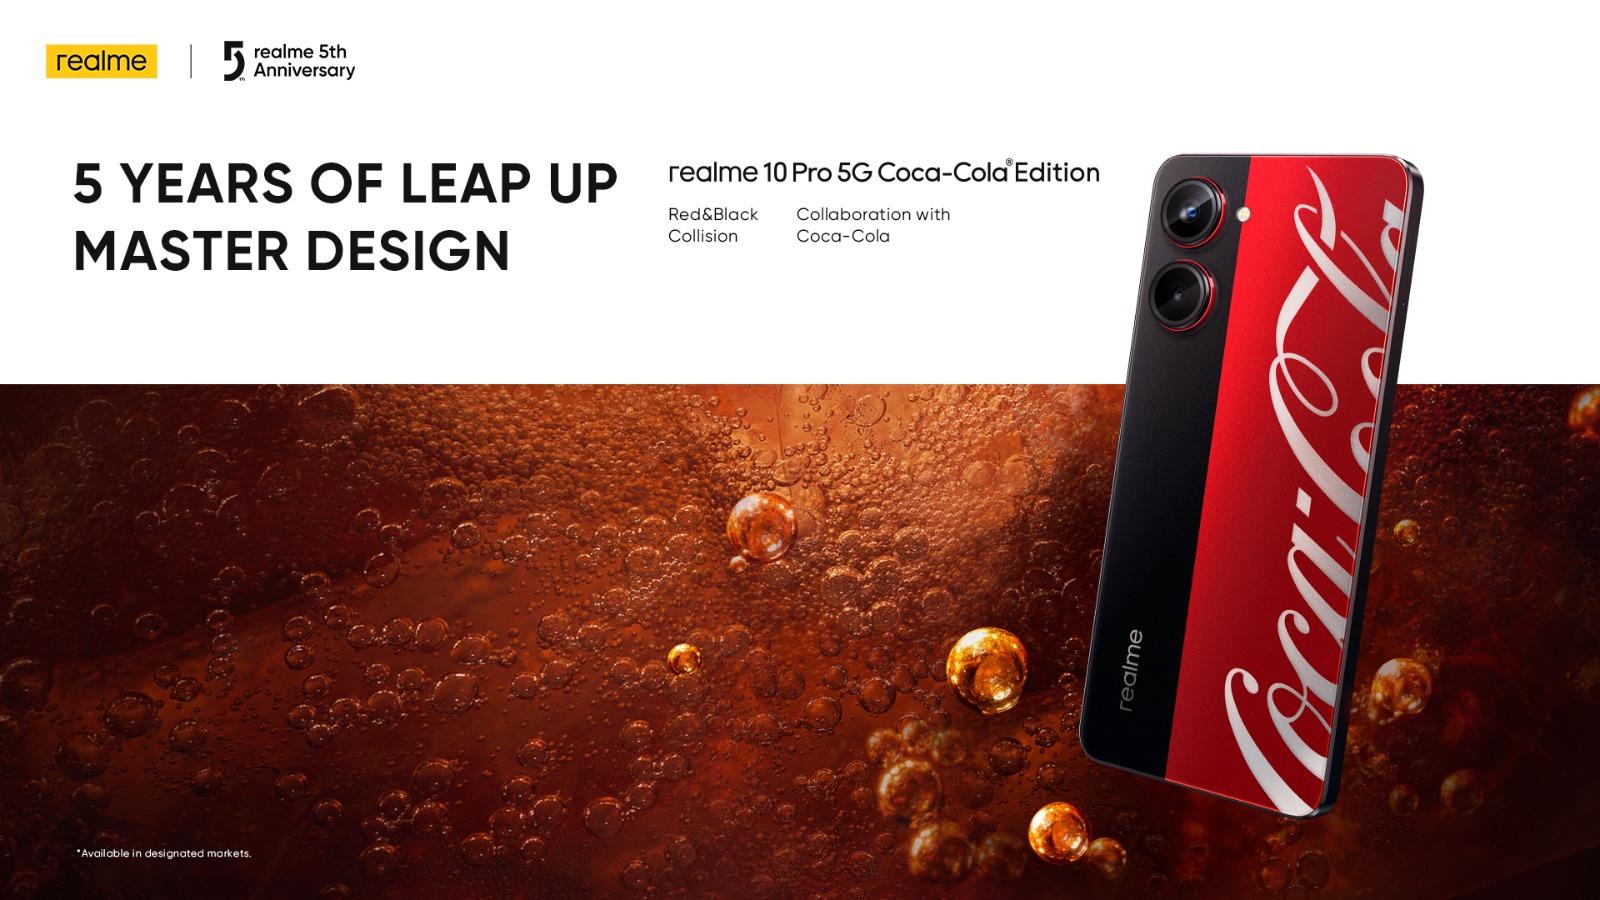 realme Aims to "Leap Up"